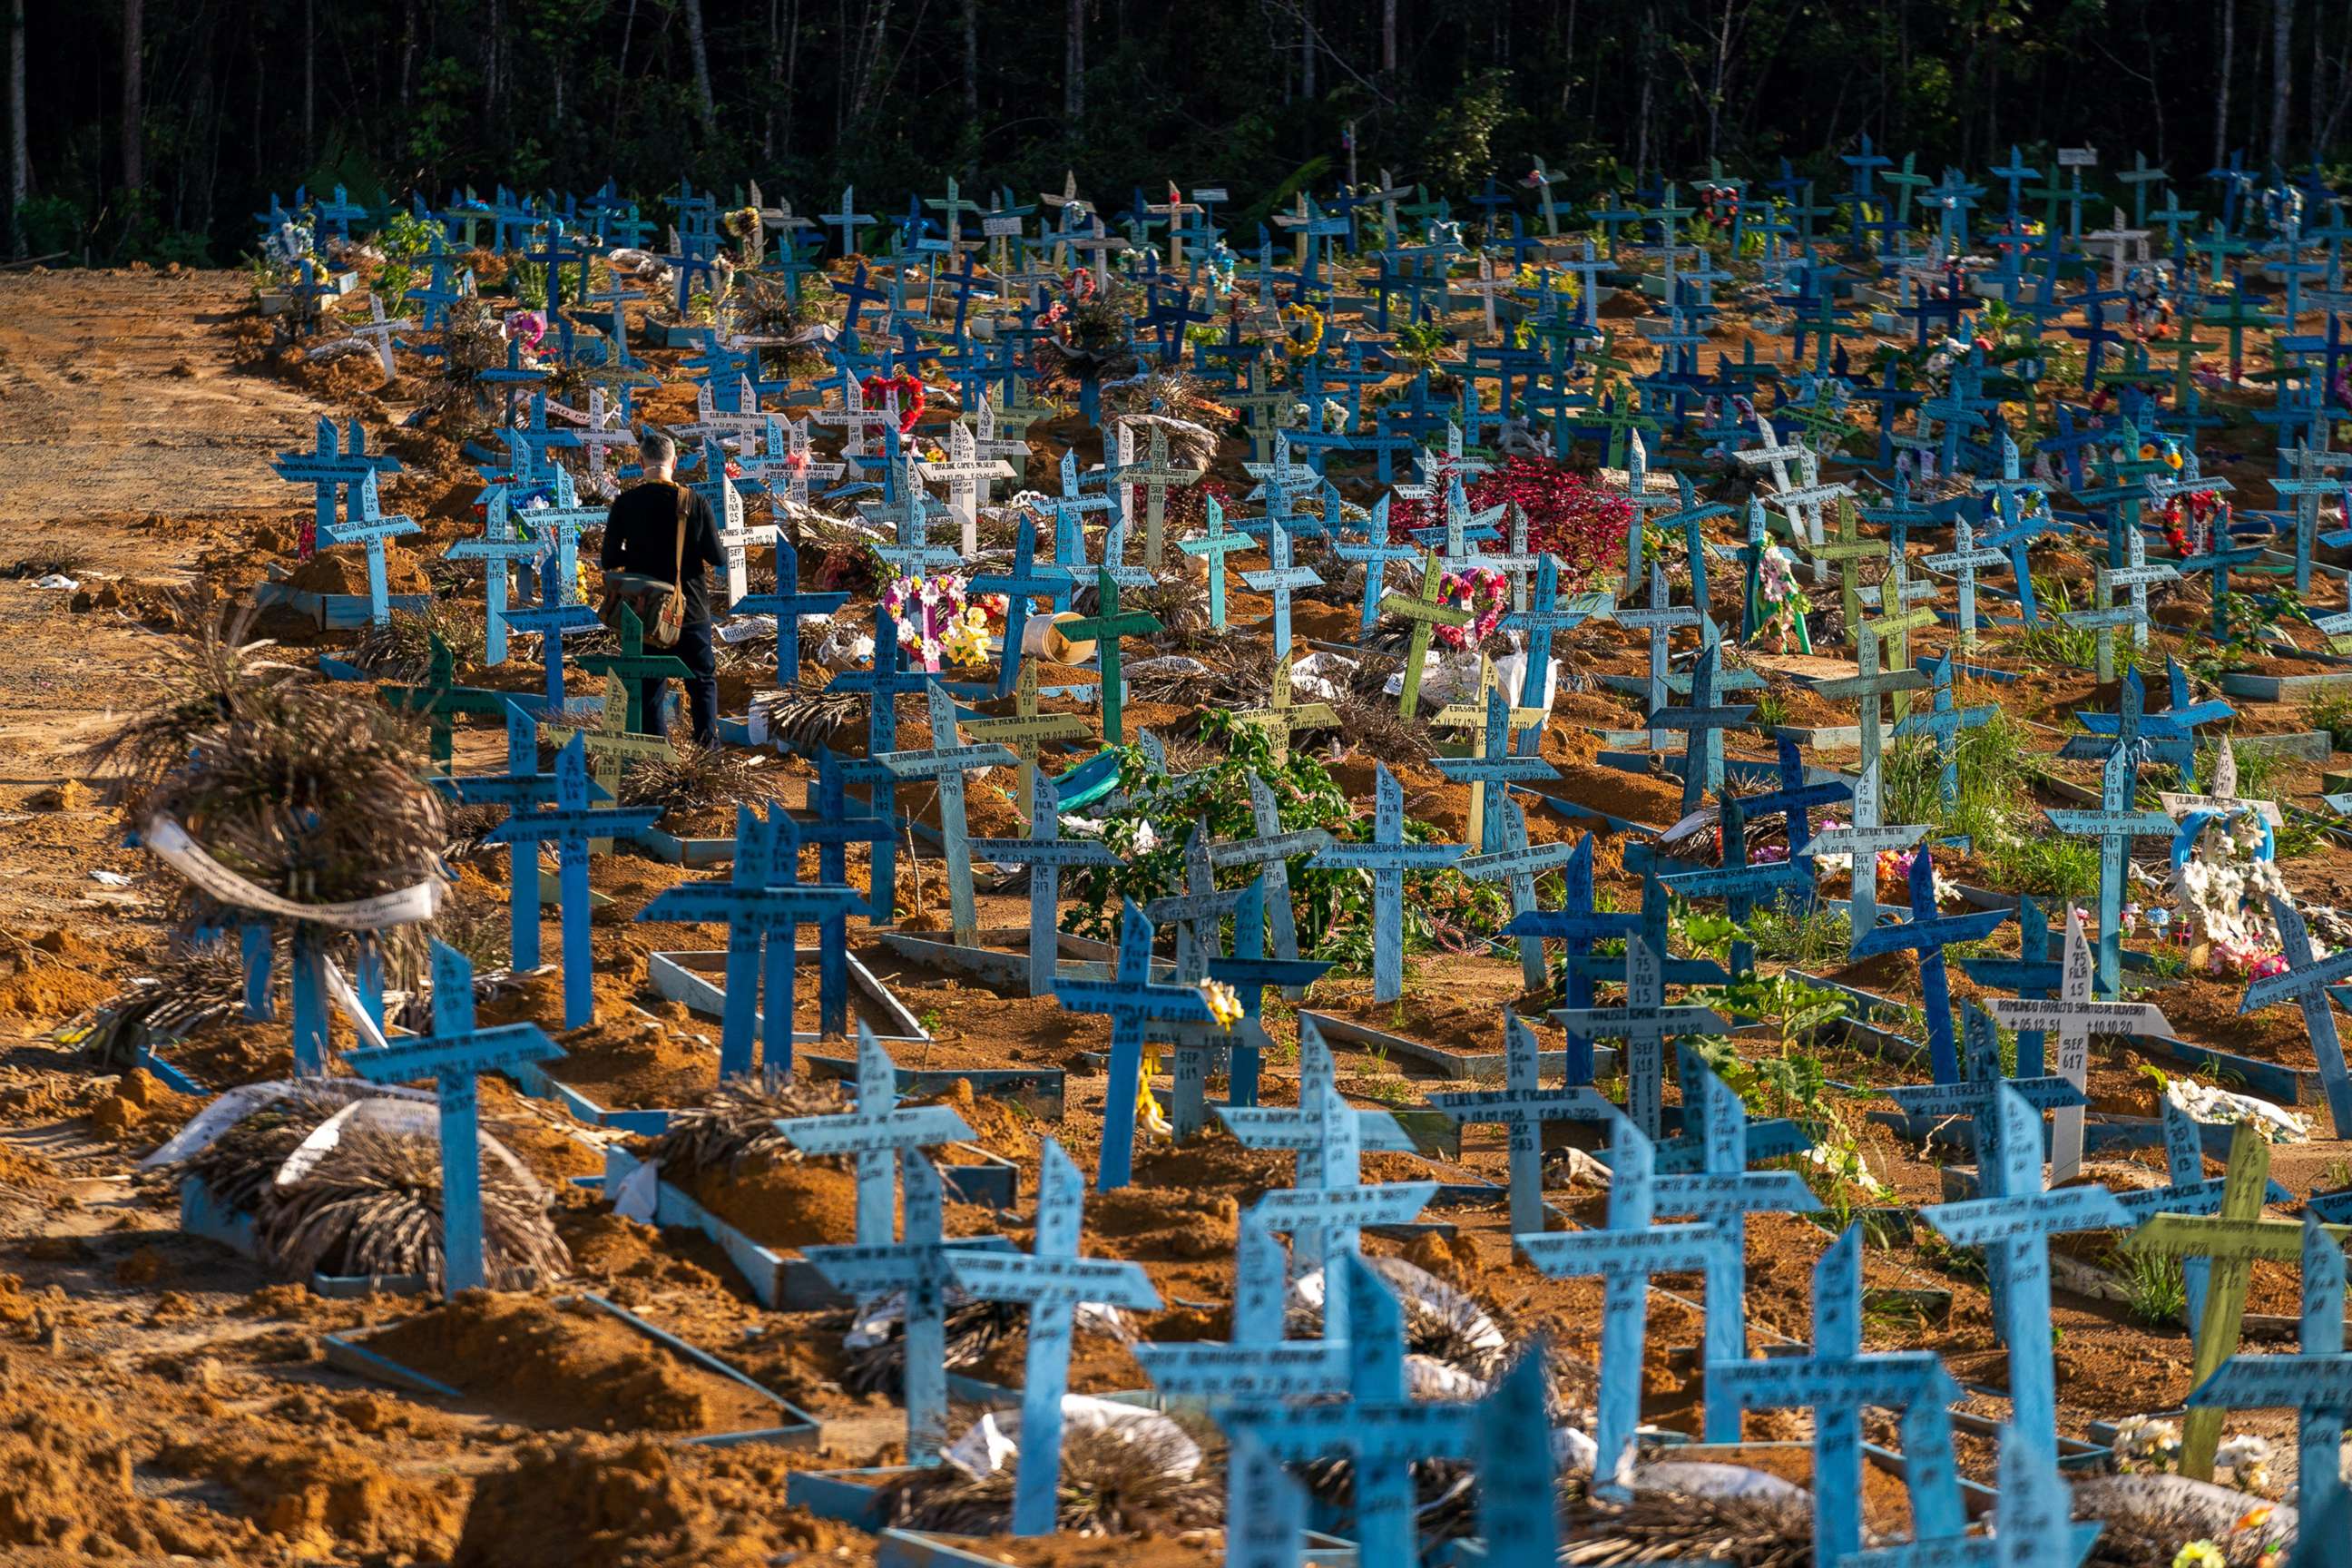 PHOTO: Blue grave markers called "Castilhos" are laid out for people who died of Covid at Nossa Senhora Aparecida public cemetery, March 30, 2021, in Manaus, Brazil.